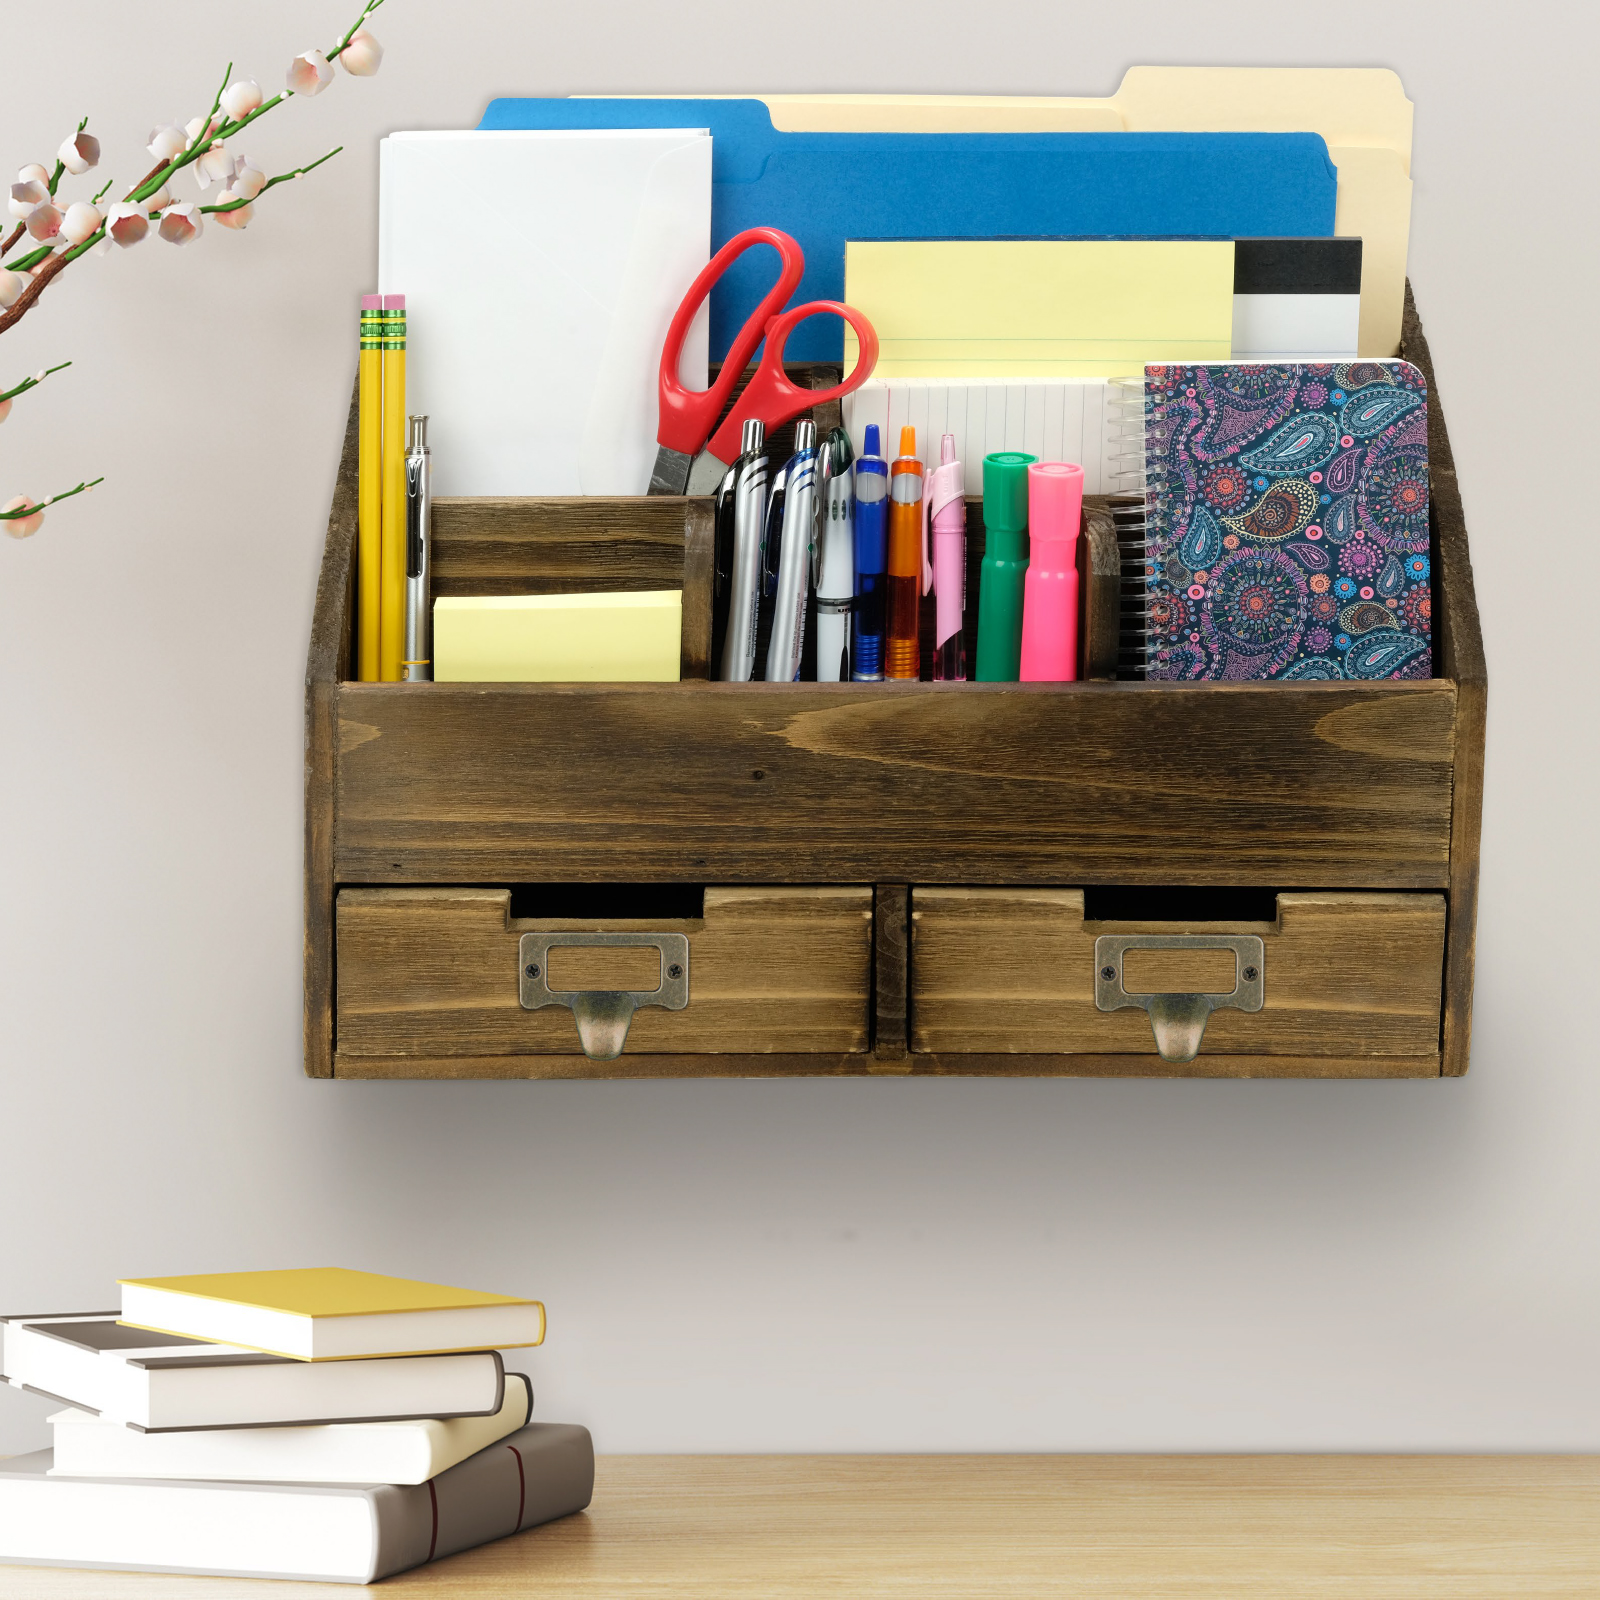 Rustic Wood Office Desk Organizer: Includes 6 Compartments ...